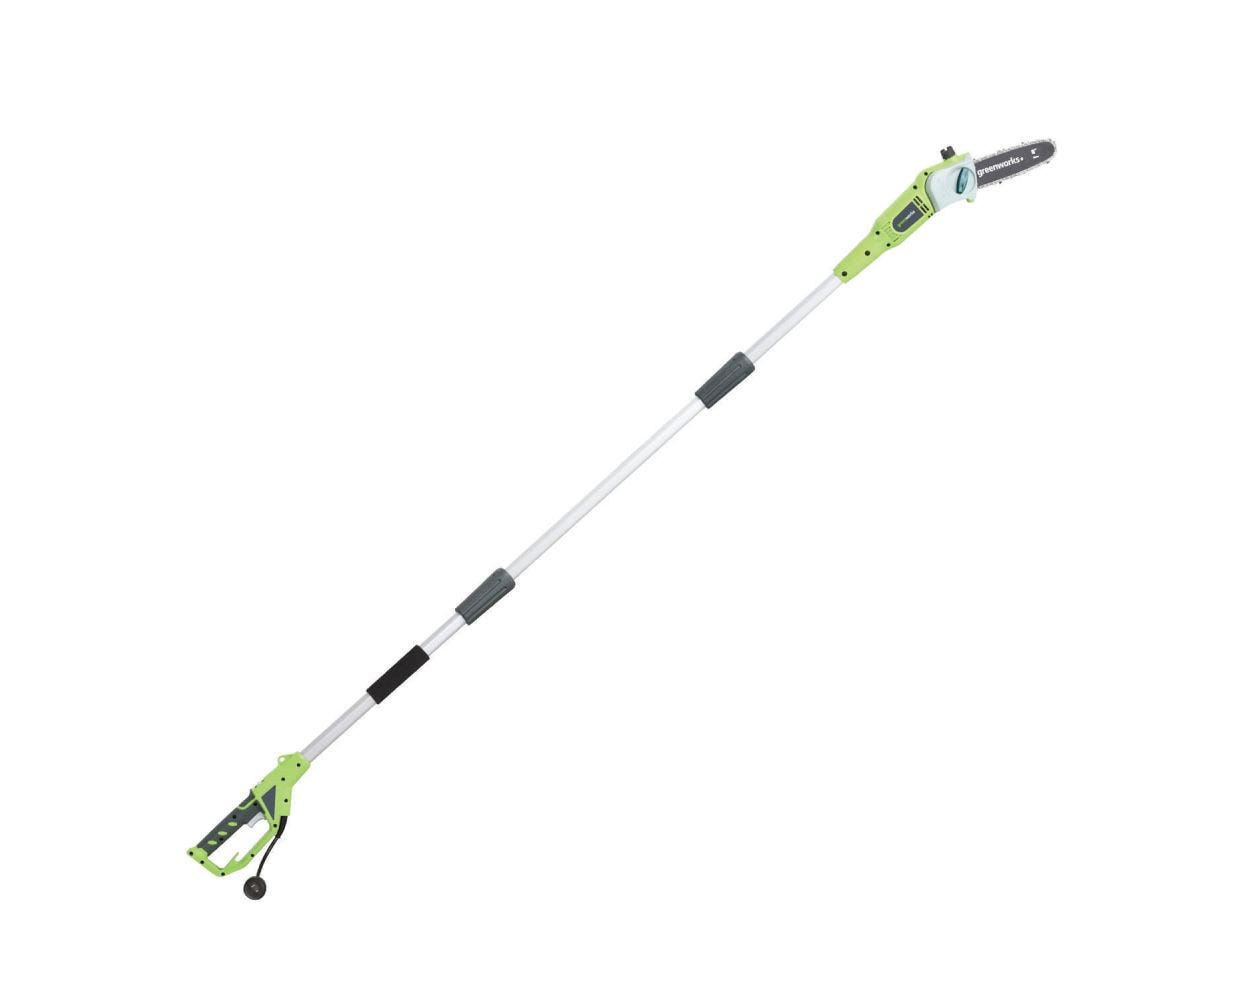 6.5 Amp Corded 8 inch Pole Saw